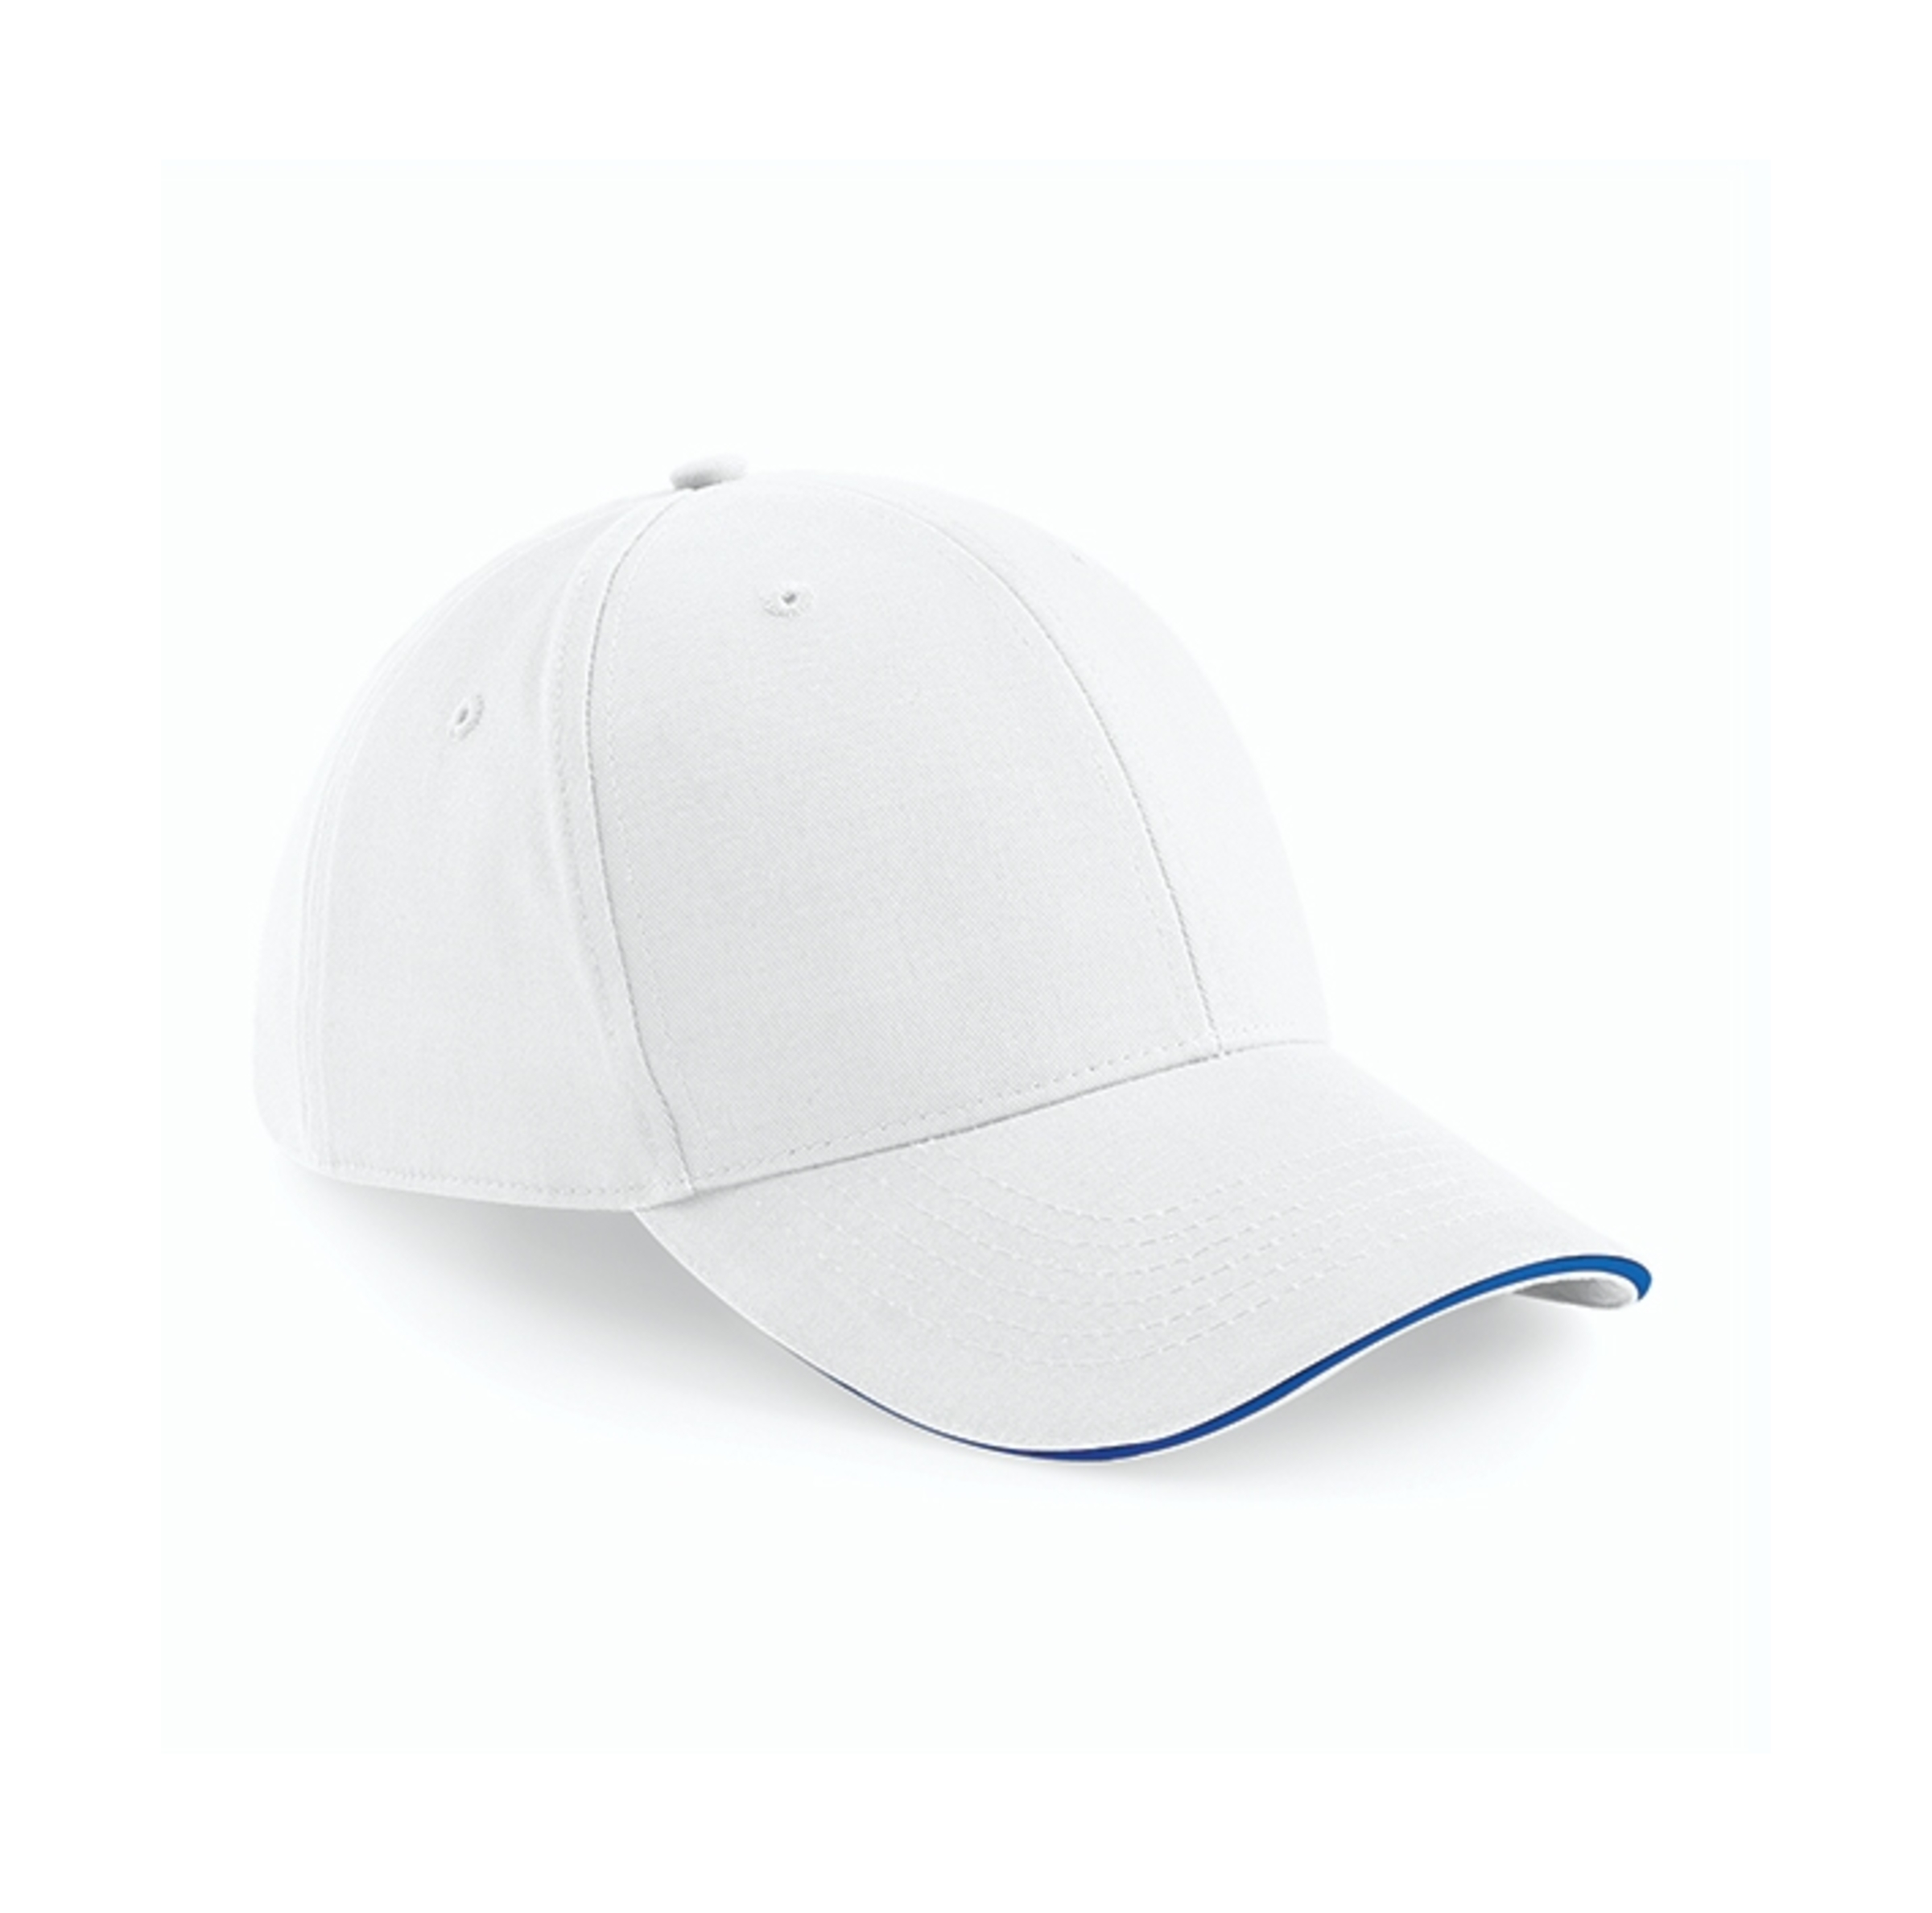 Beechfield Athleisure 6 Panel Cap - White/Bright Royal - One Size